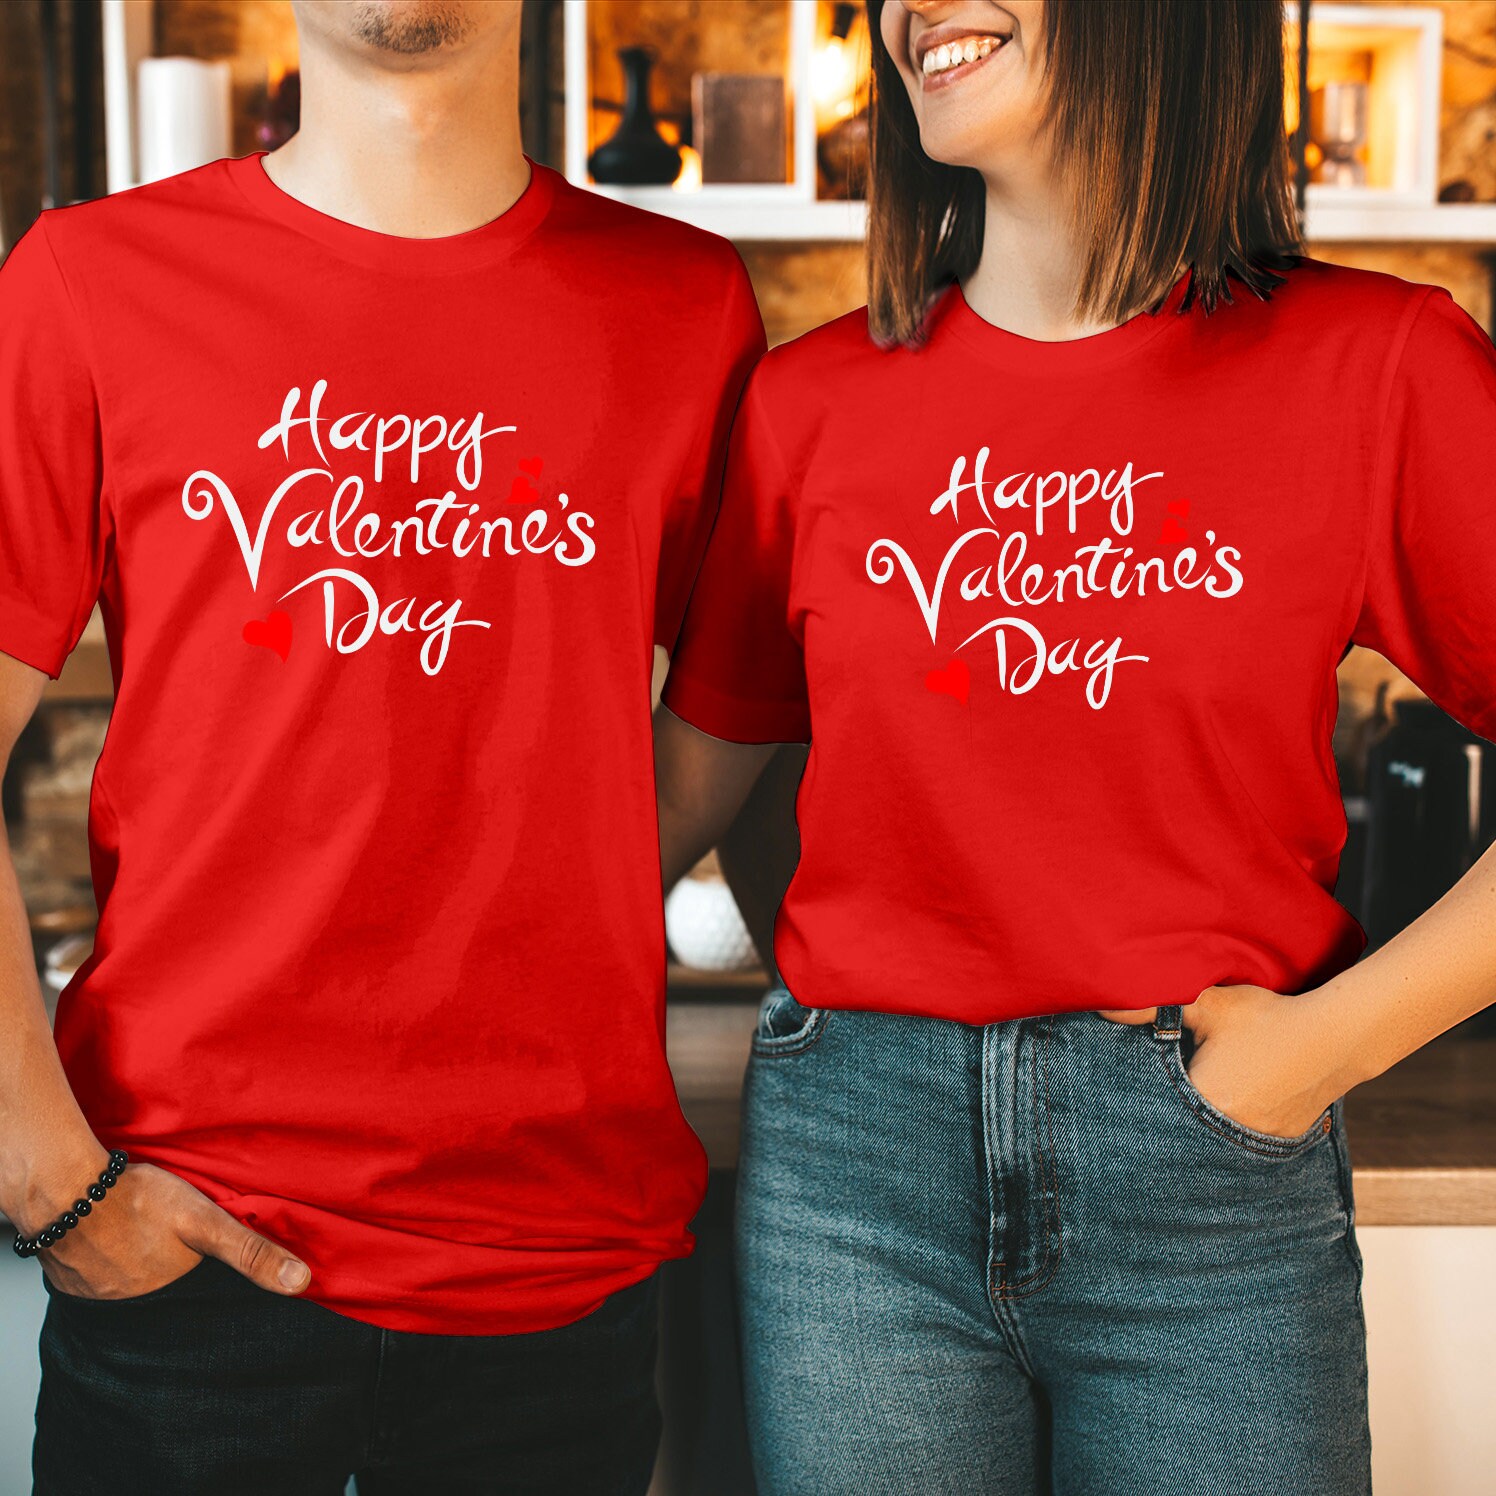 Read more about the article Valentine’s Day Outfit Ideas: Expressing Love Through Fashion